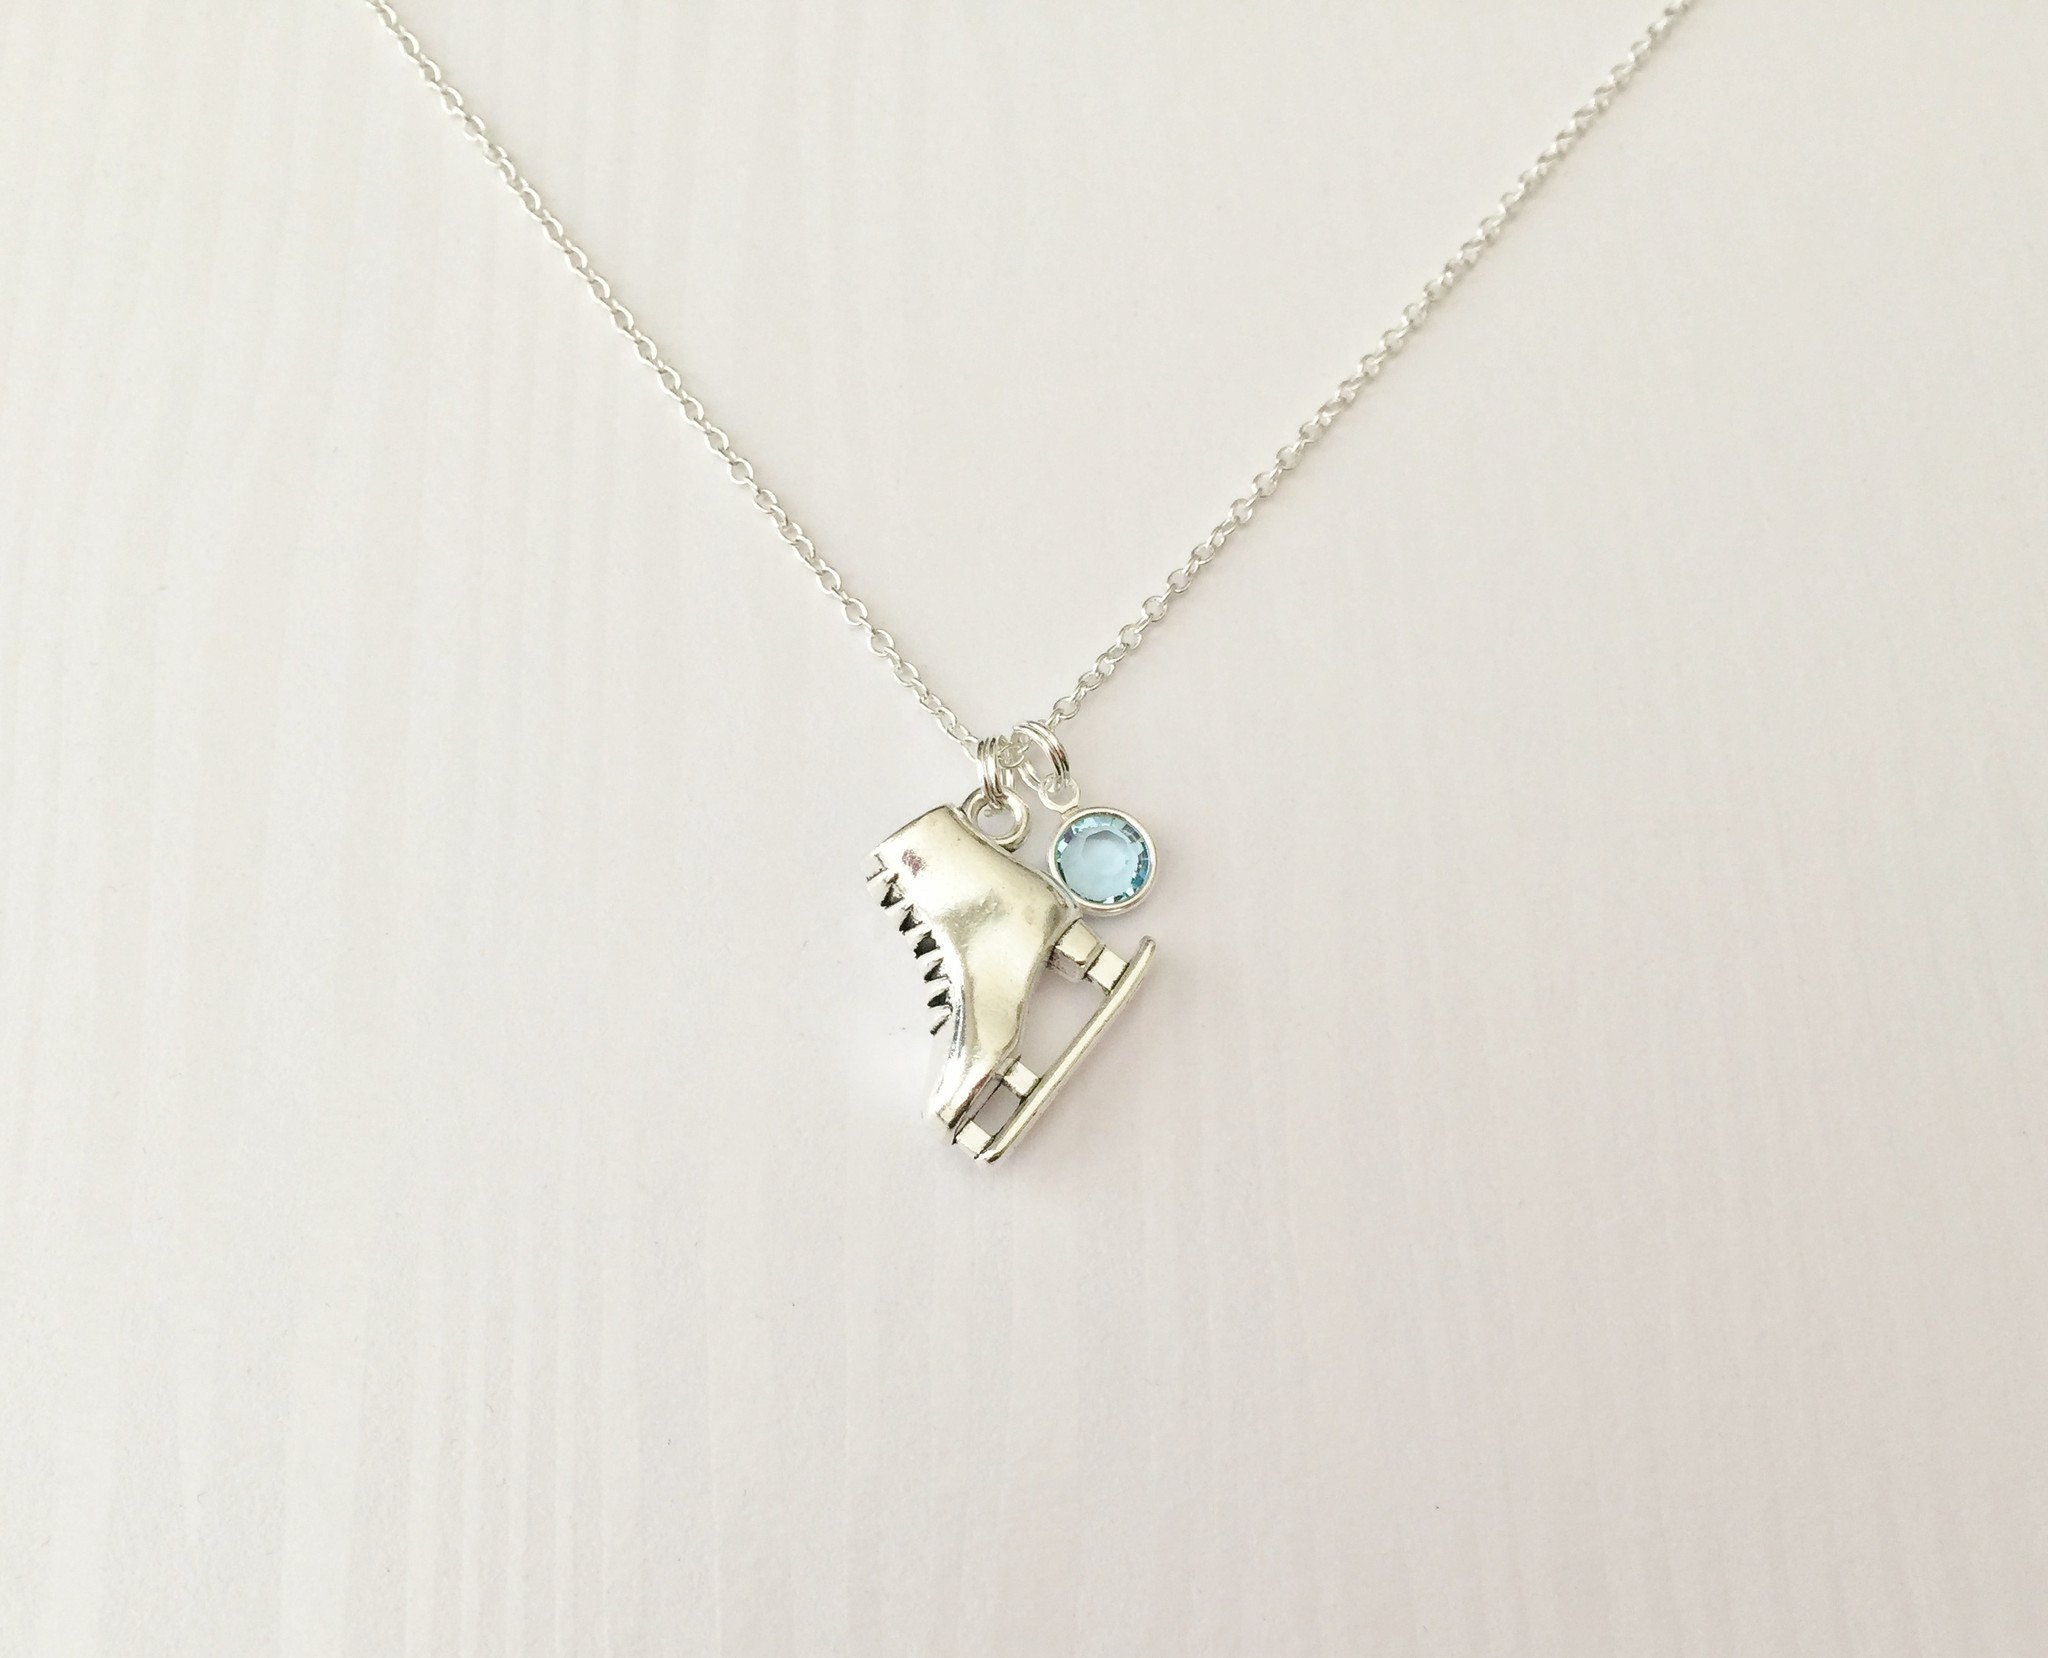 Ice Skating Necklace with Swarovski Birthstone - Anomaly Creations & Designs
 - 1